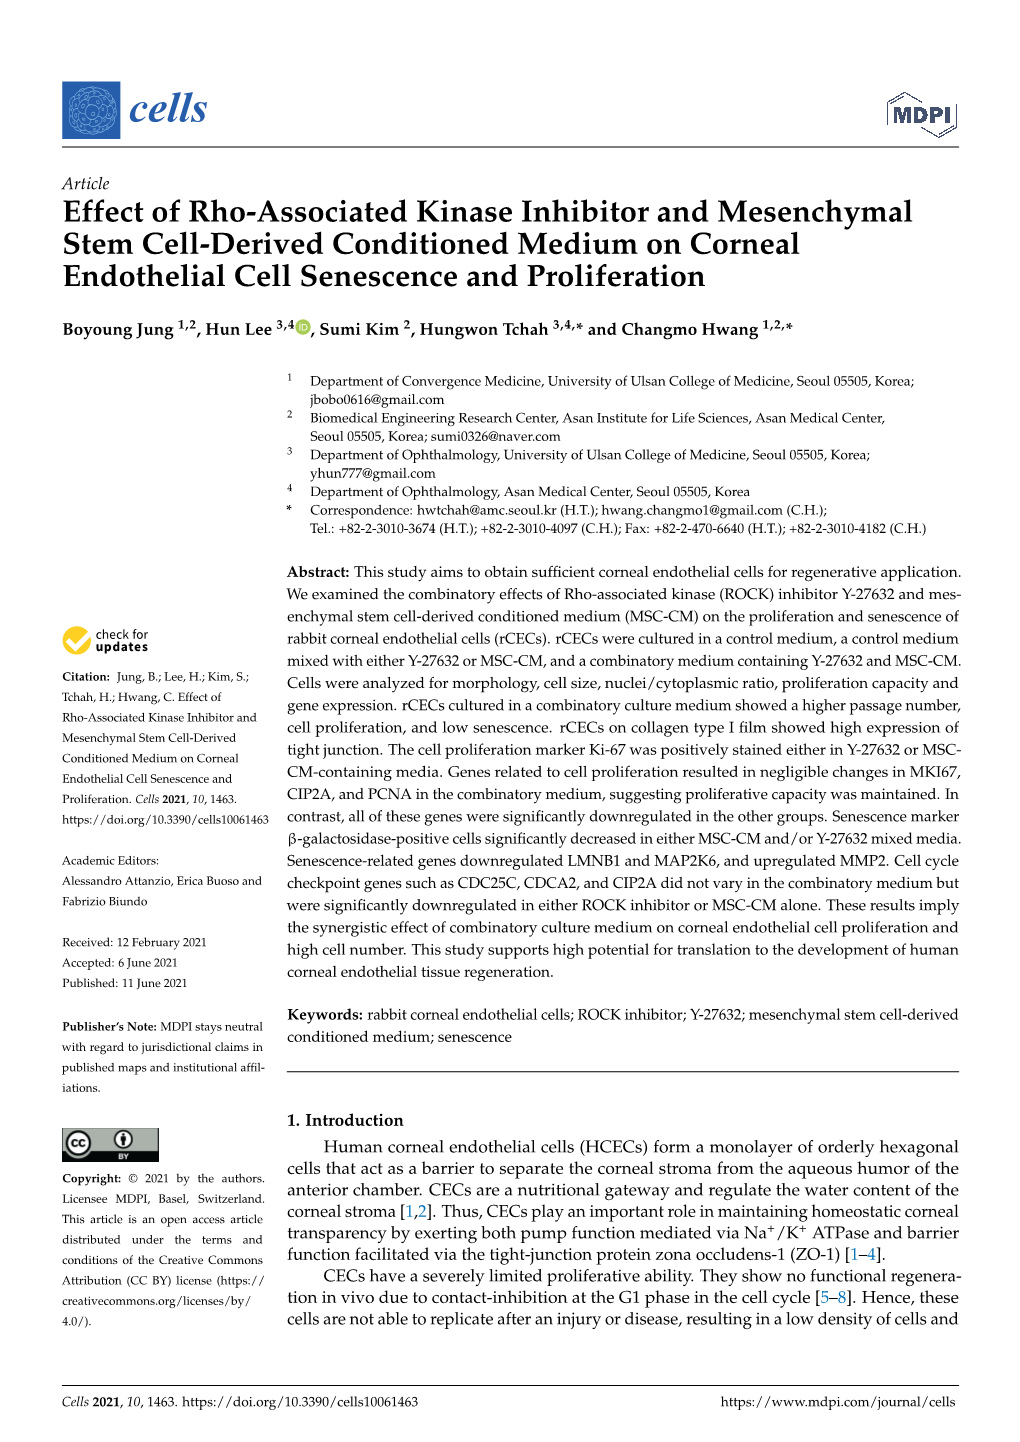 Effect of Rho-Associated Kinase Inhibitor and Mesenchymal Stem Cell-Derived Conditioned Medium on Corneal Endothelial Cell Senescence and Proliferation